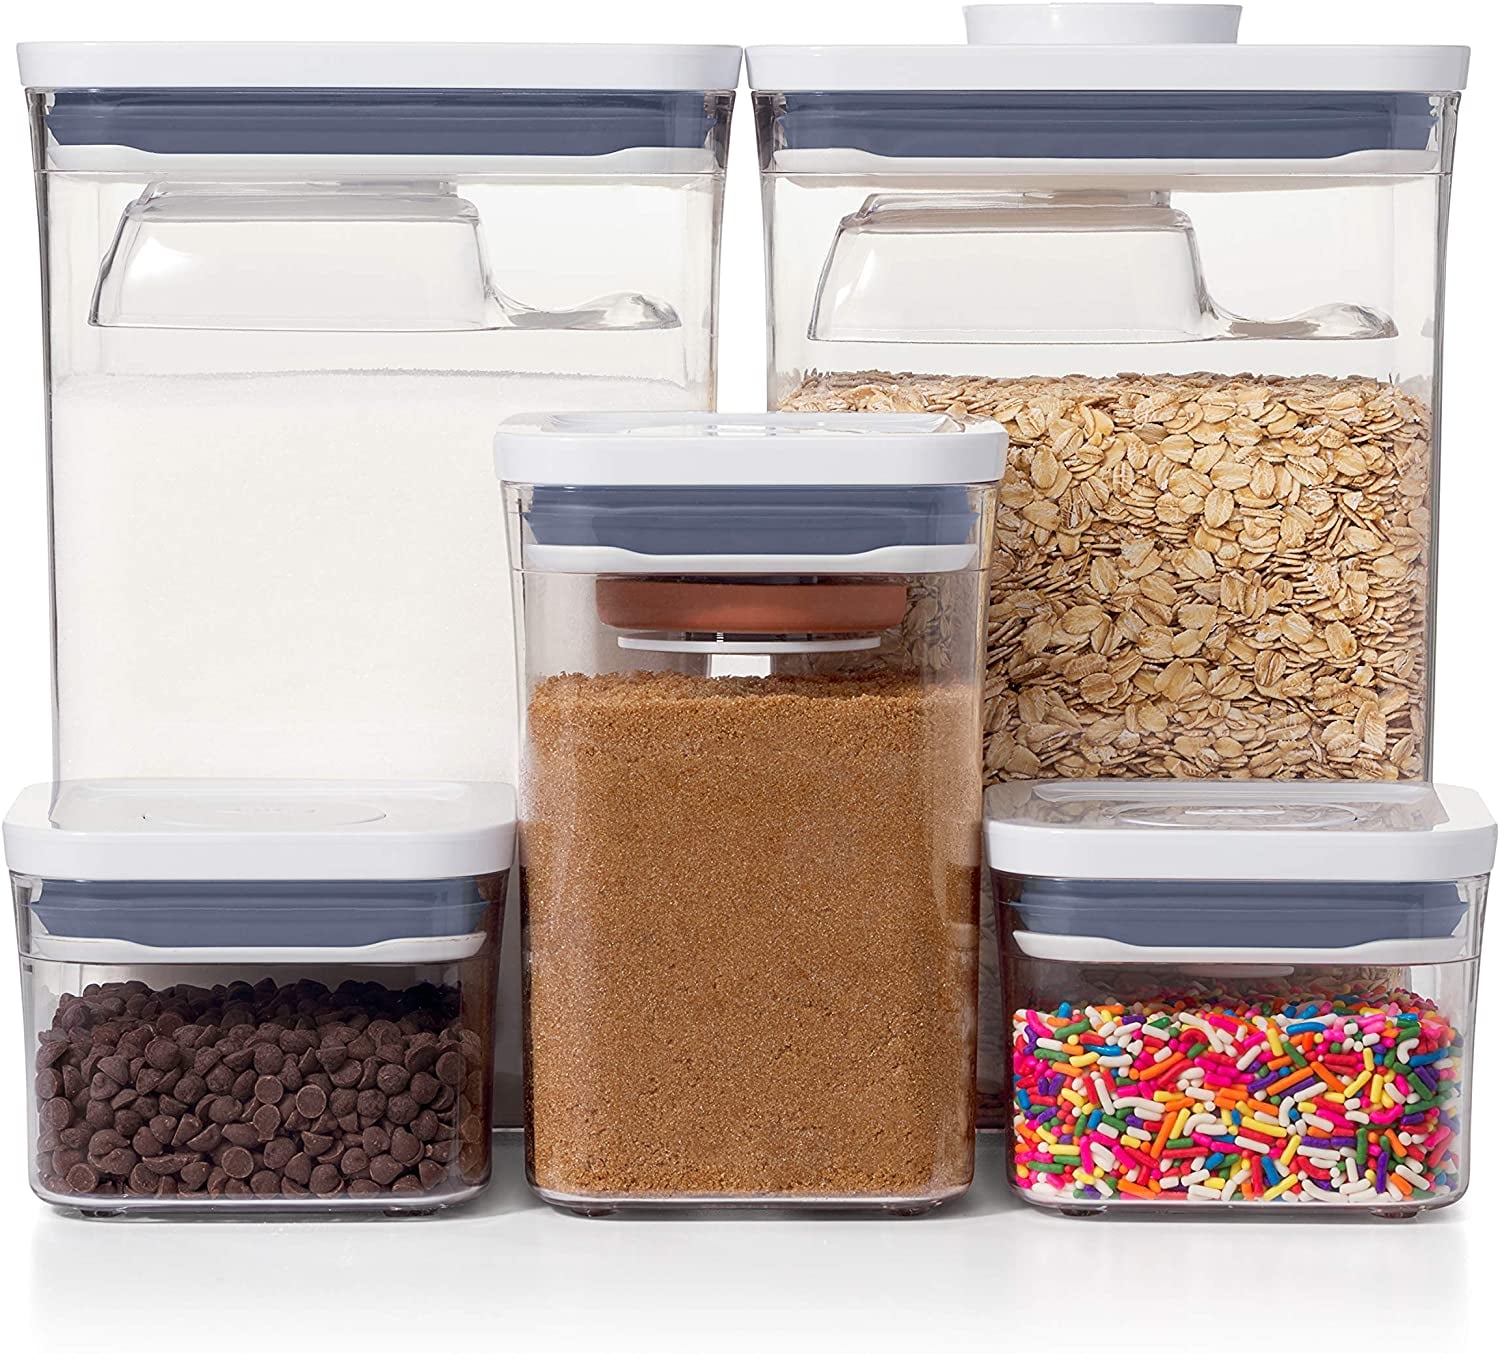 OXO POP Containers Review: Are They Worth It?